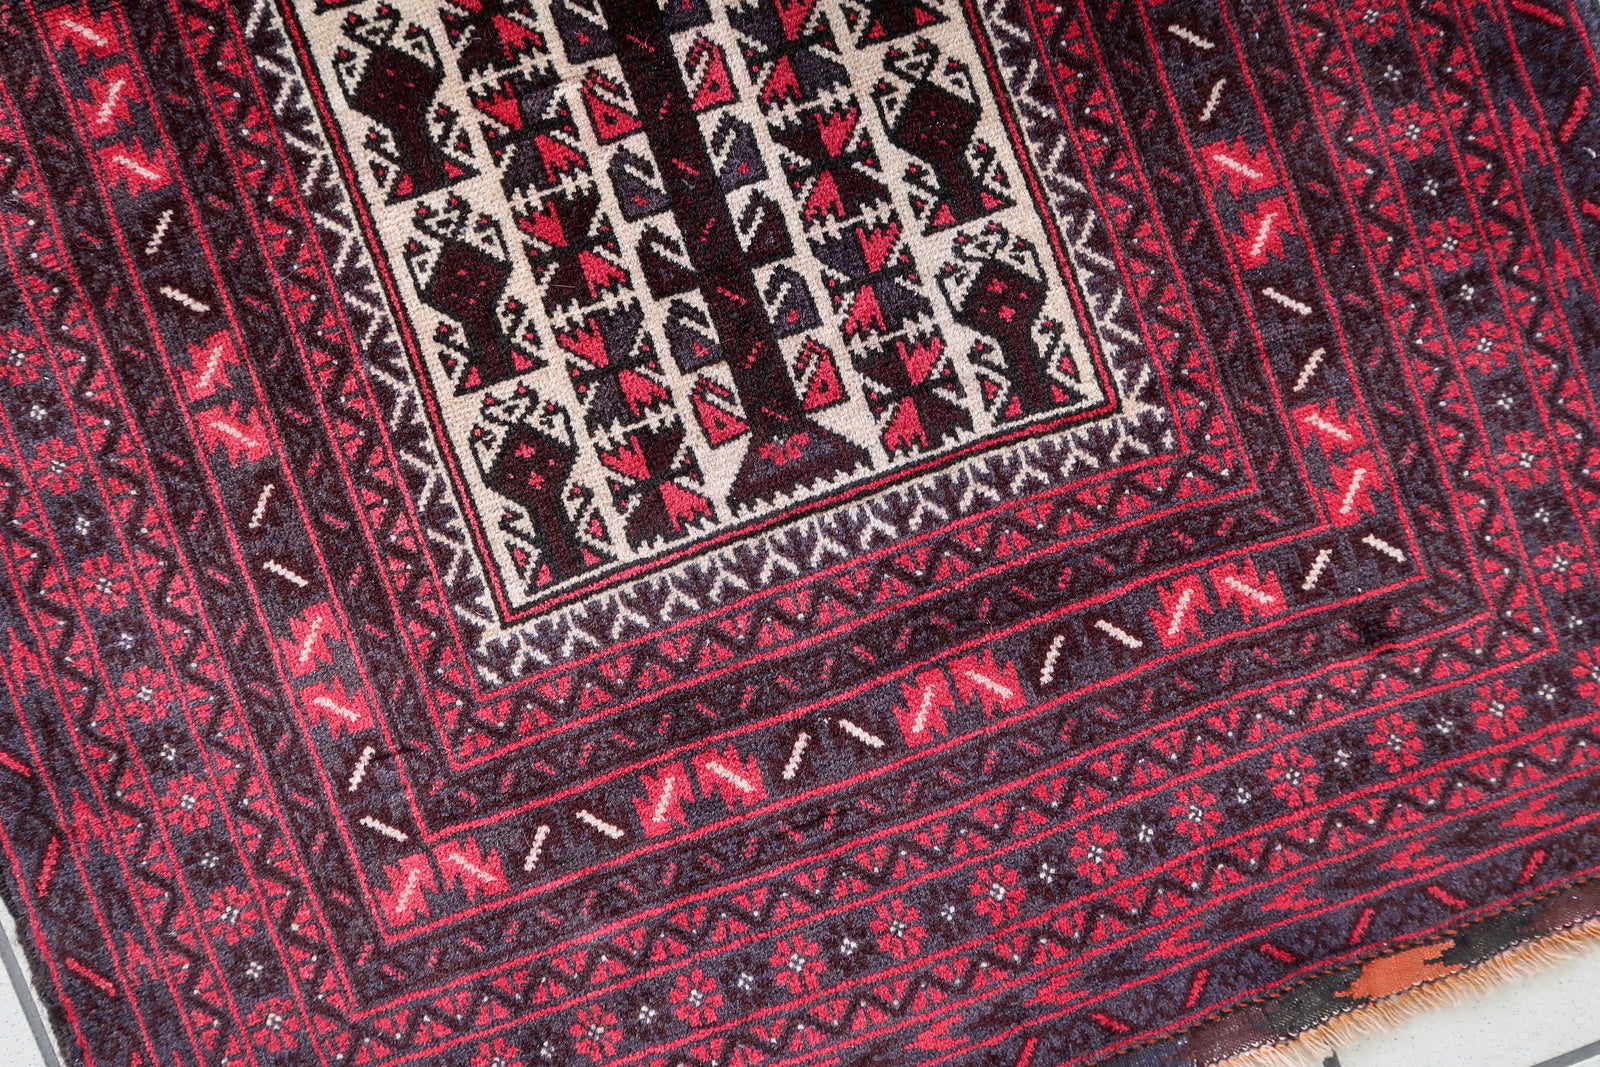 Detailed View of the Red Border and Geometric Patterns